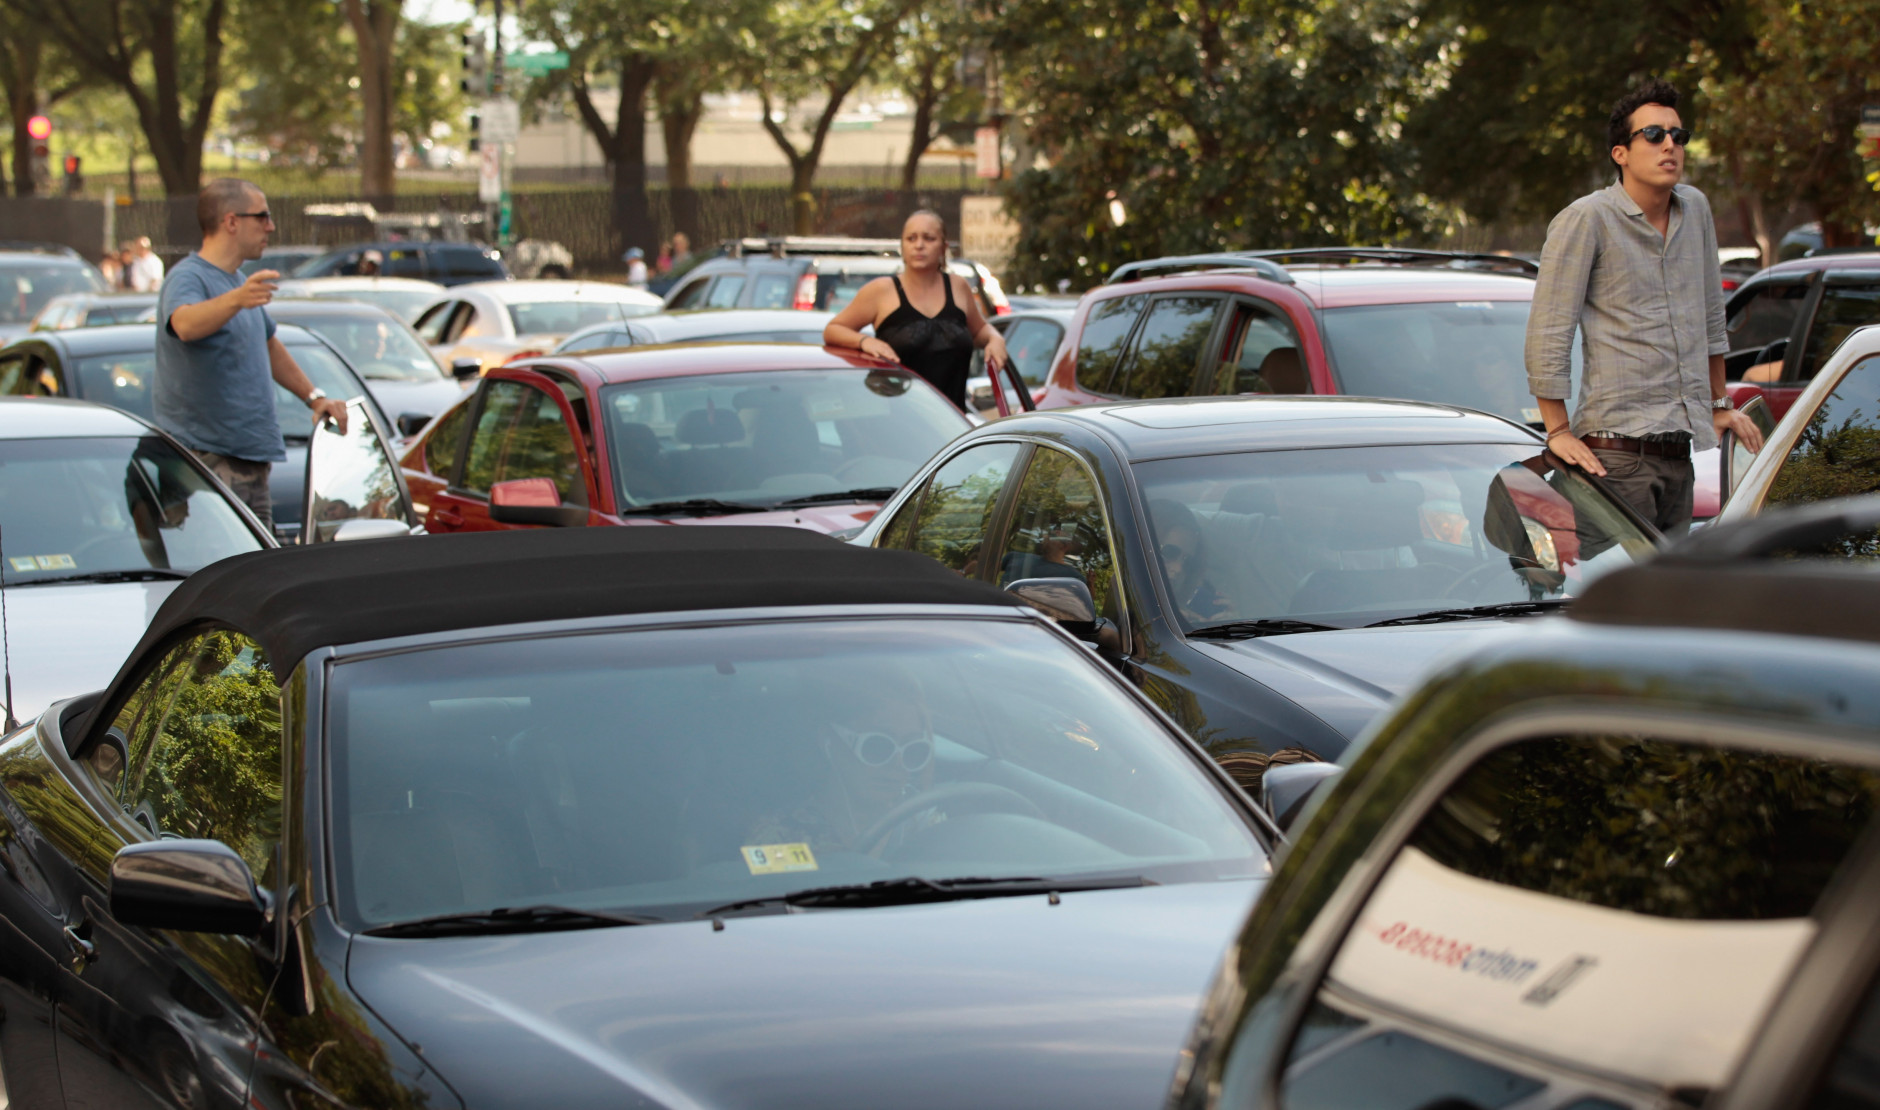 WASHINGTON, DC - AUGUST 23:  Drivers climb out of their cars to survey a traffic jam on 14th Street NW near the Ronald Reagan Building after a 5.8 magnitude earthquake rattled the East Coast August 23, 2011 in Washington, United States. The quake, centered near Miner, Virginia, rattled states from Maine to North Carolina but produced no serious injuries or damage.  (Photo by Chip Somodevilla/Getty Images)